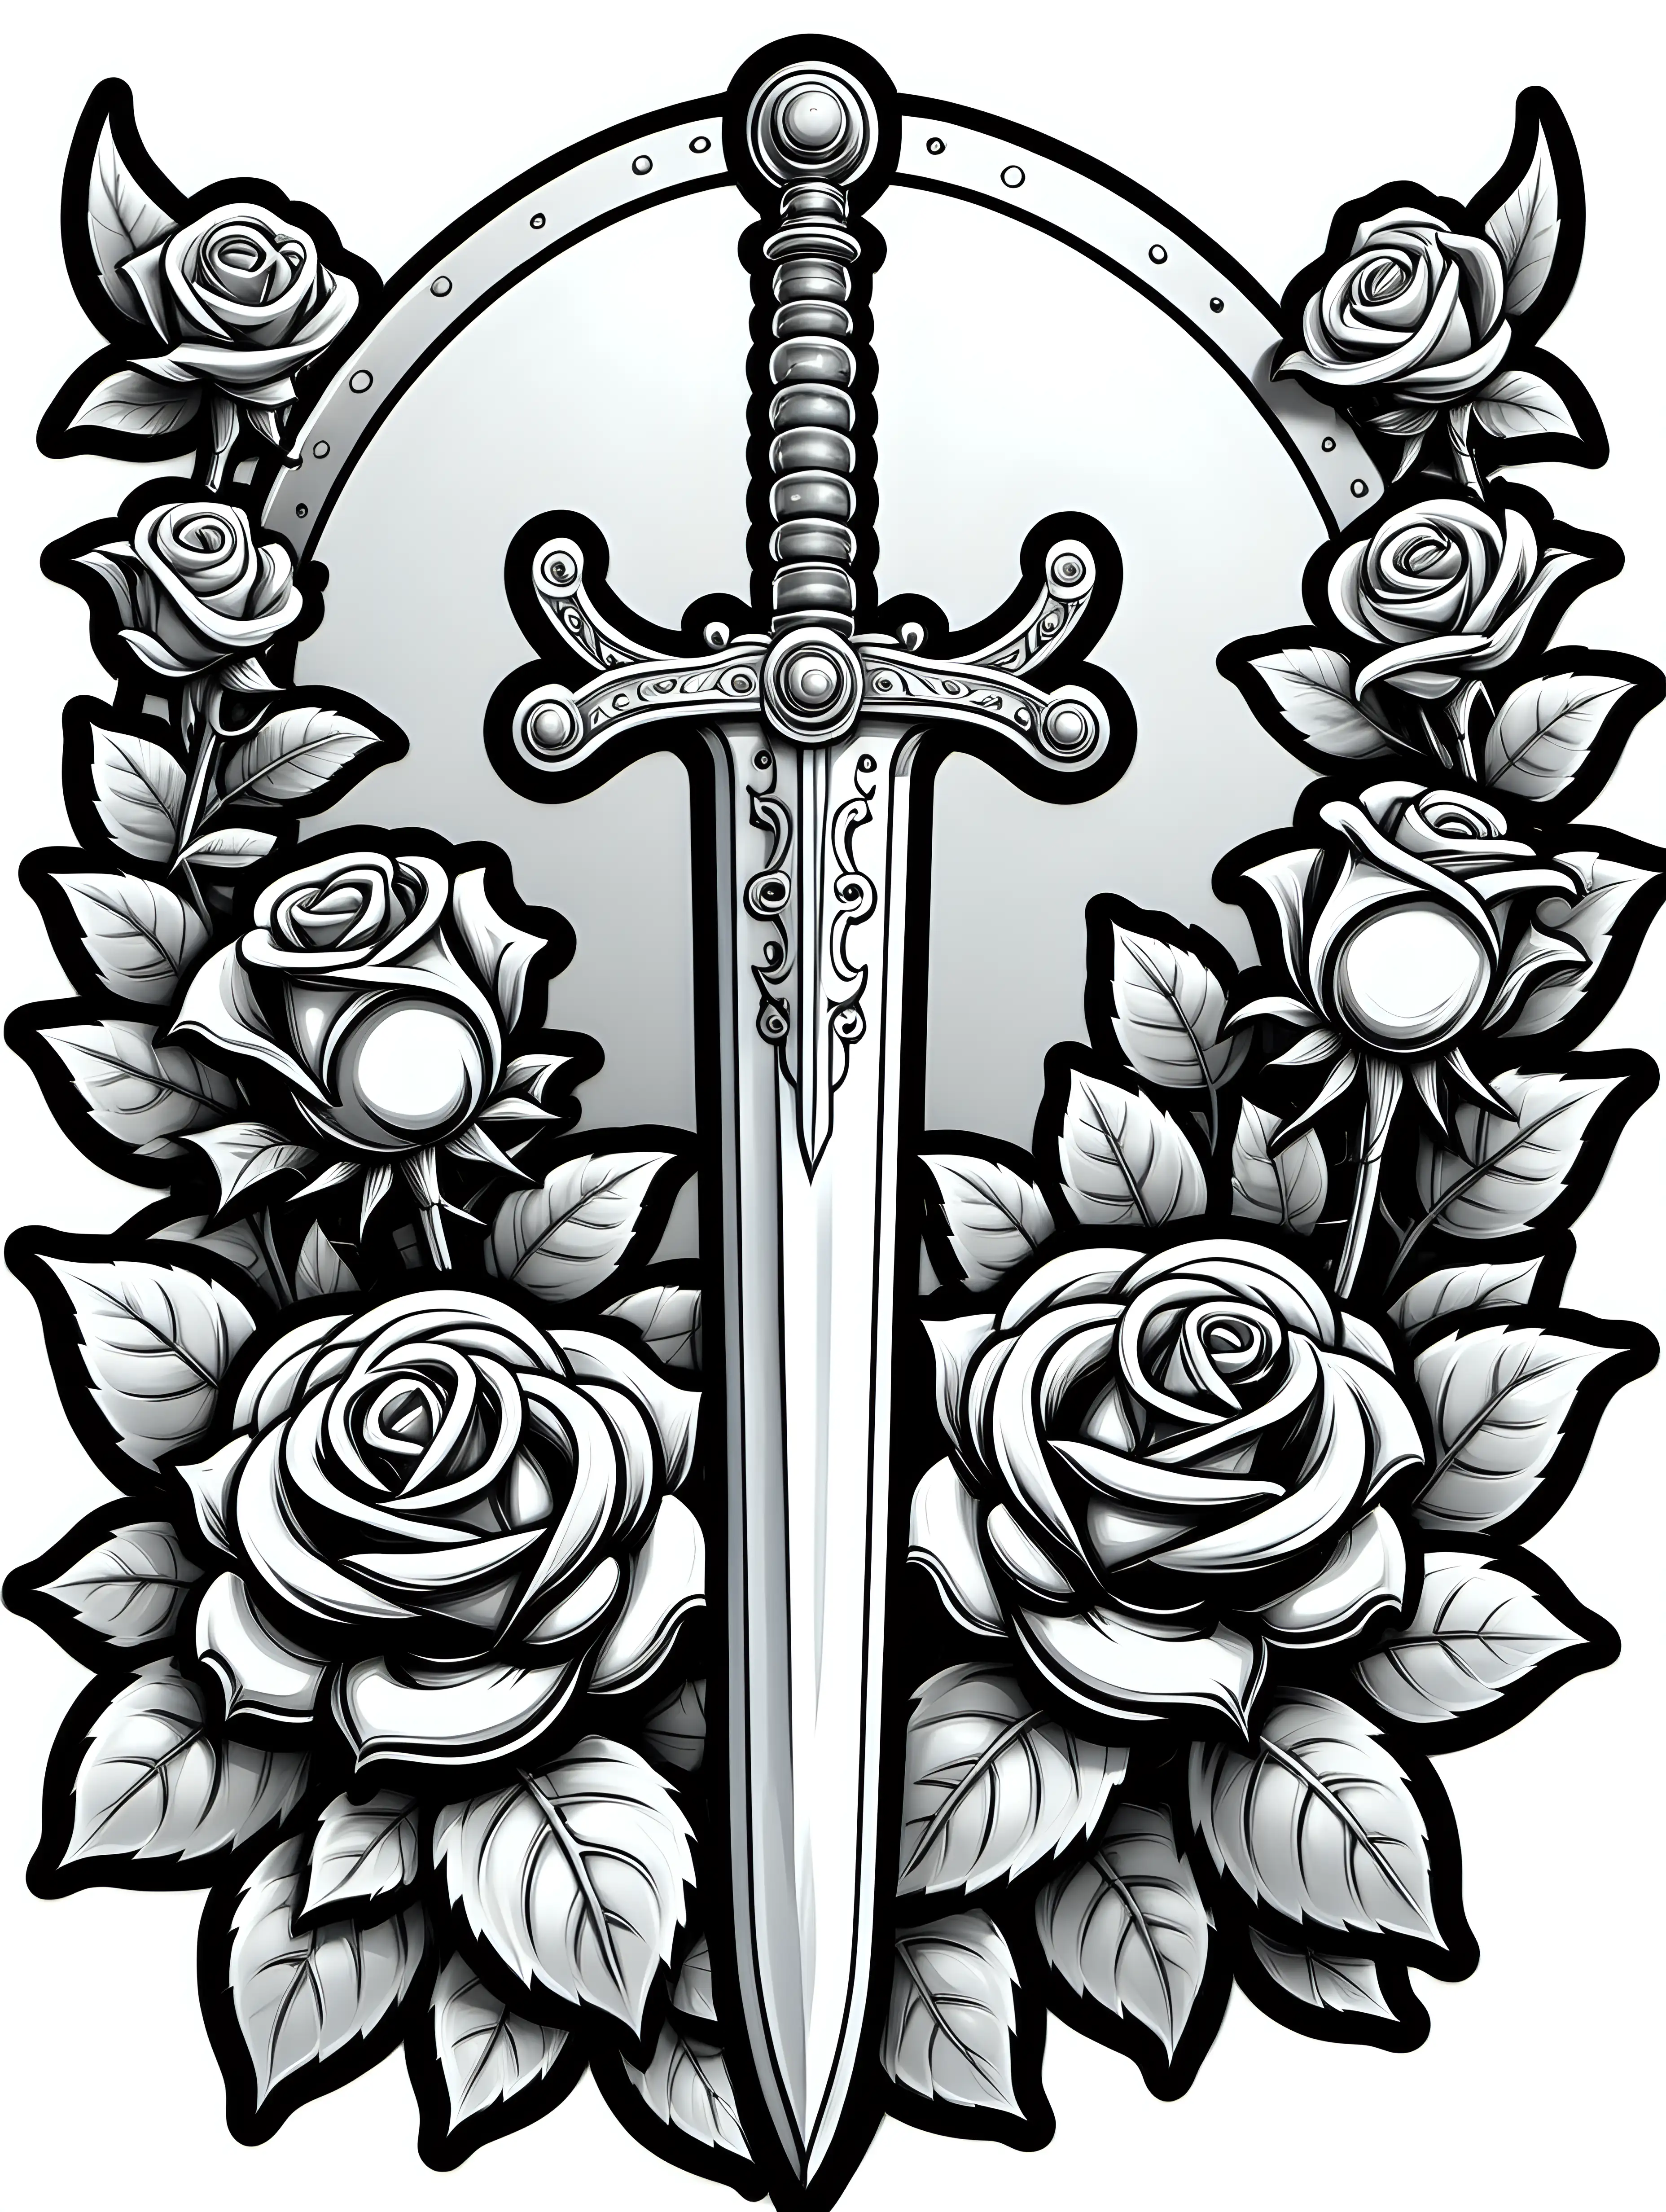 Cartoon Sword with Roses Sticker in Black and White Coloring Book Style